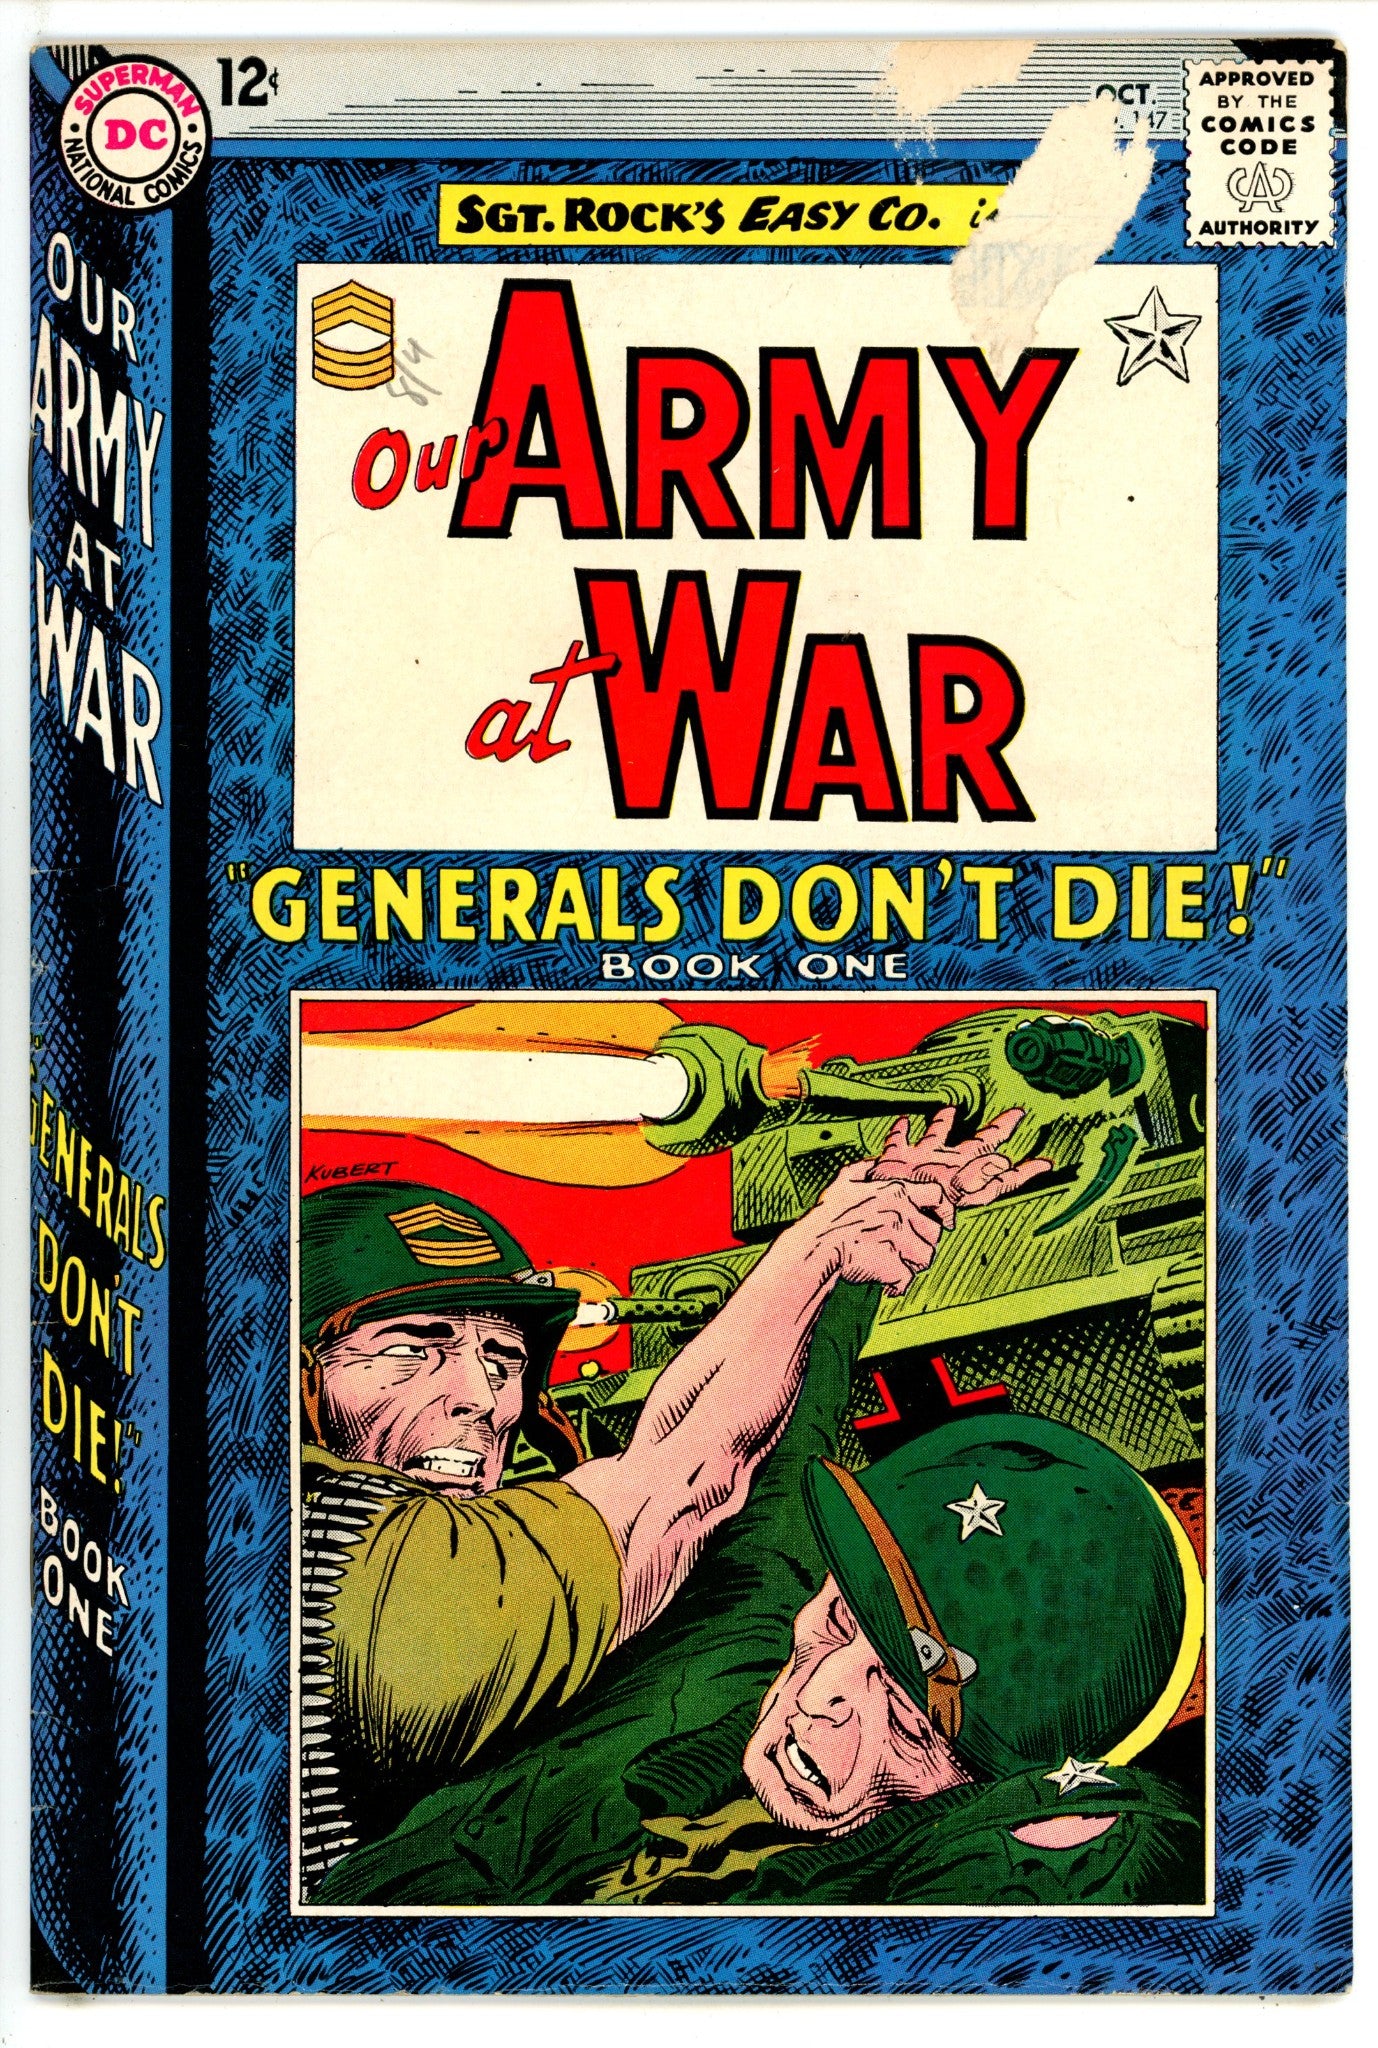 Our Army at War Vol 1 147 VG (4.0) (1964) 